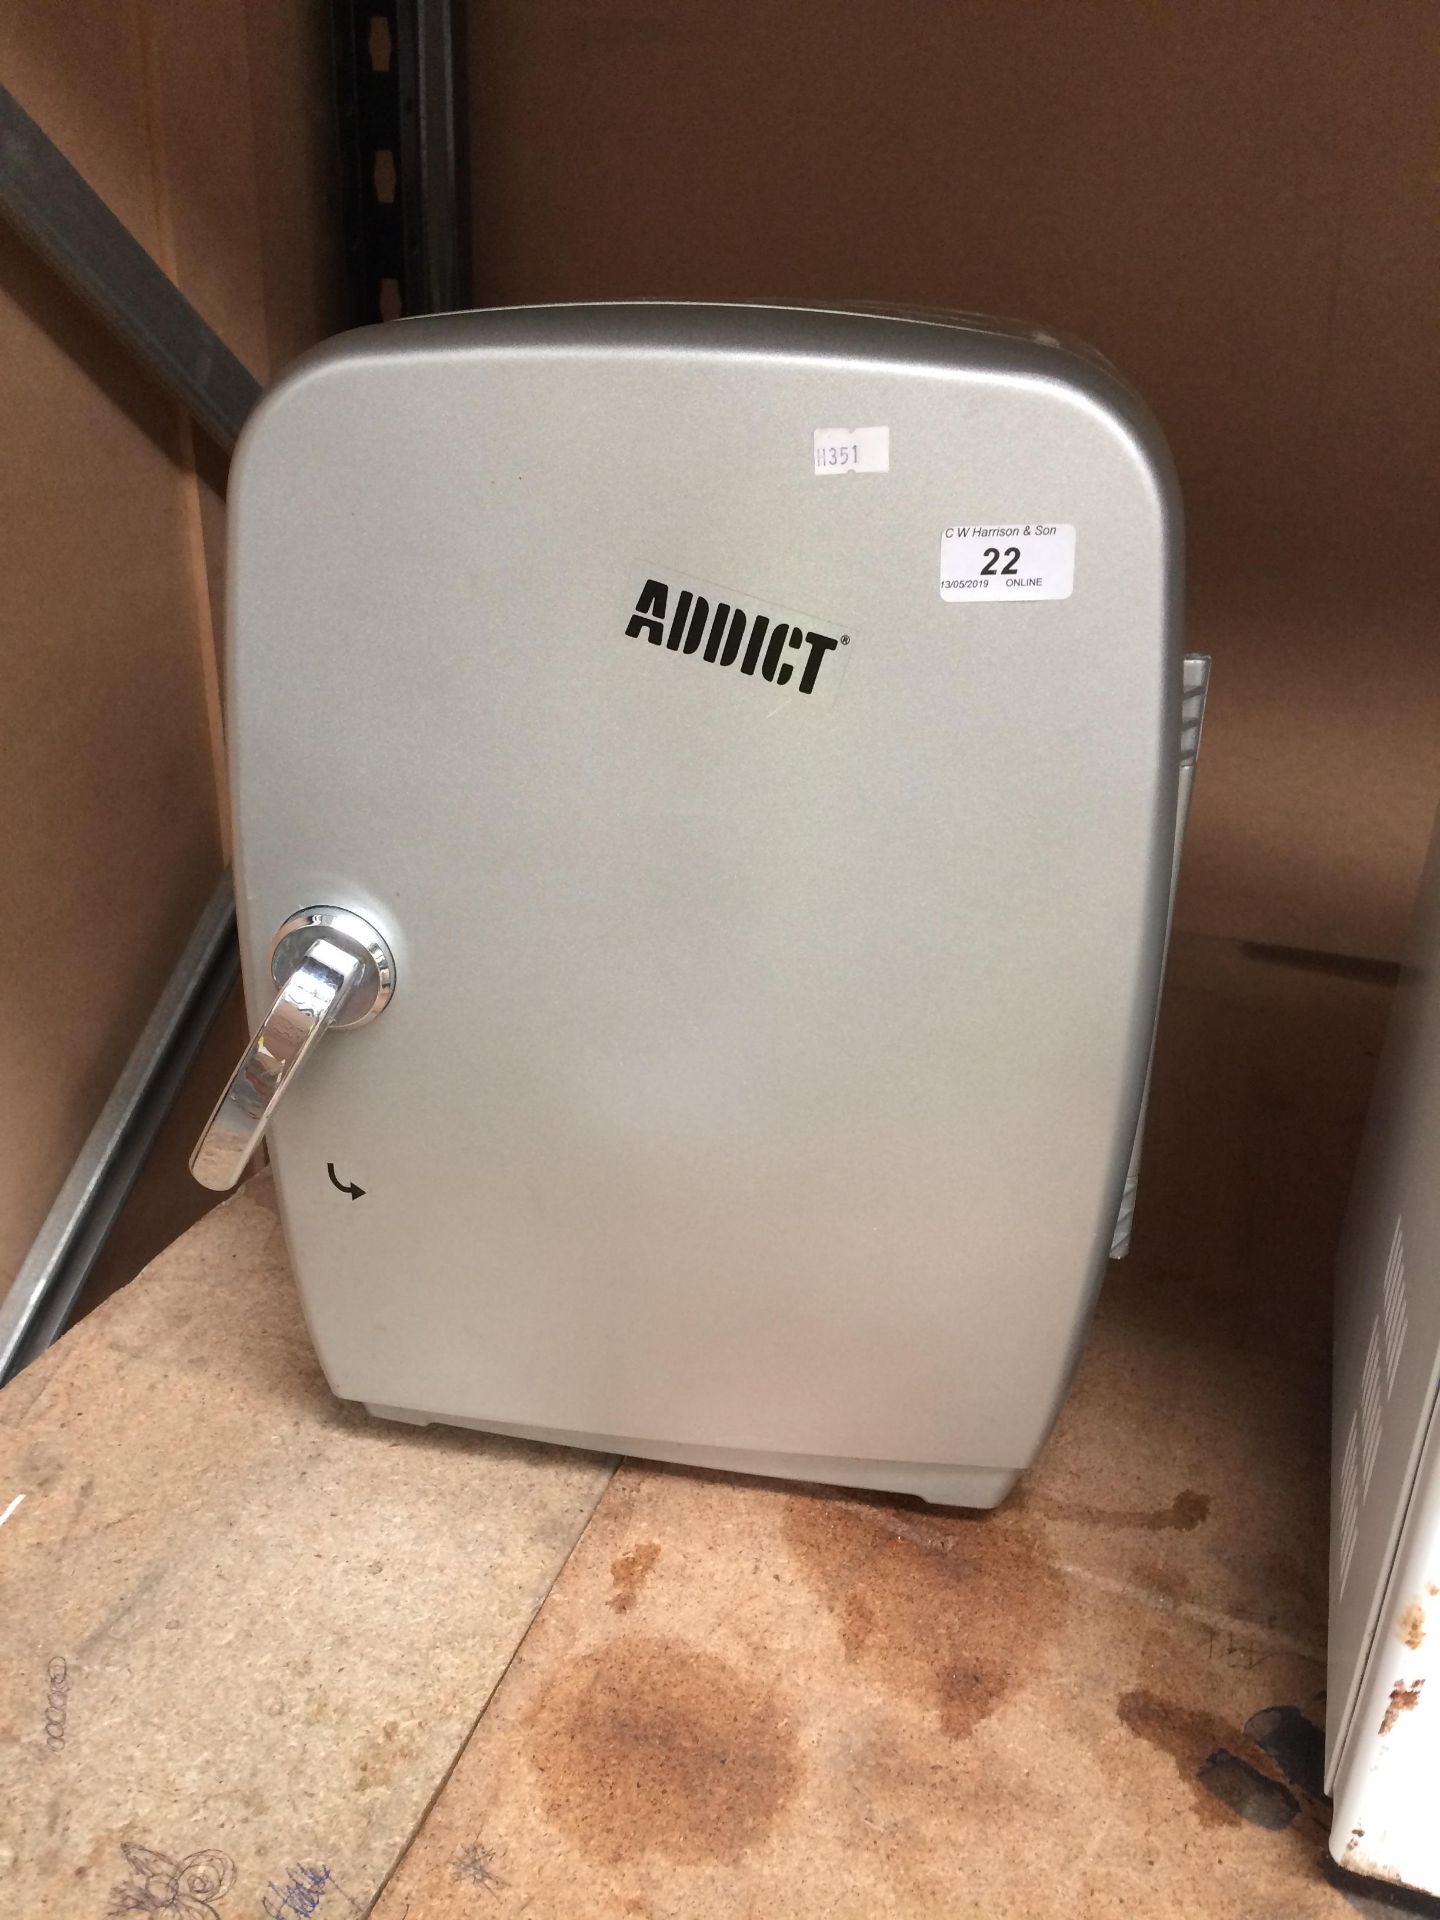 An Addict table top fridge - sold as viewed failed safety test